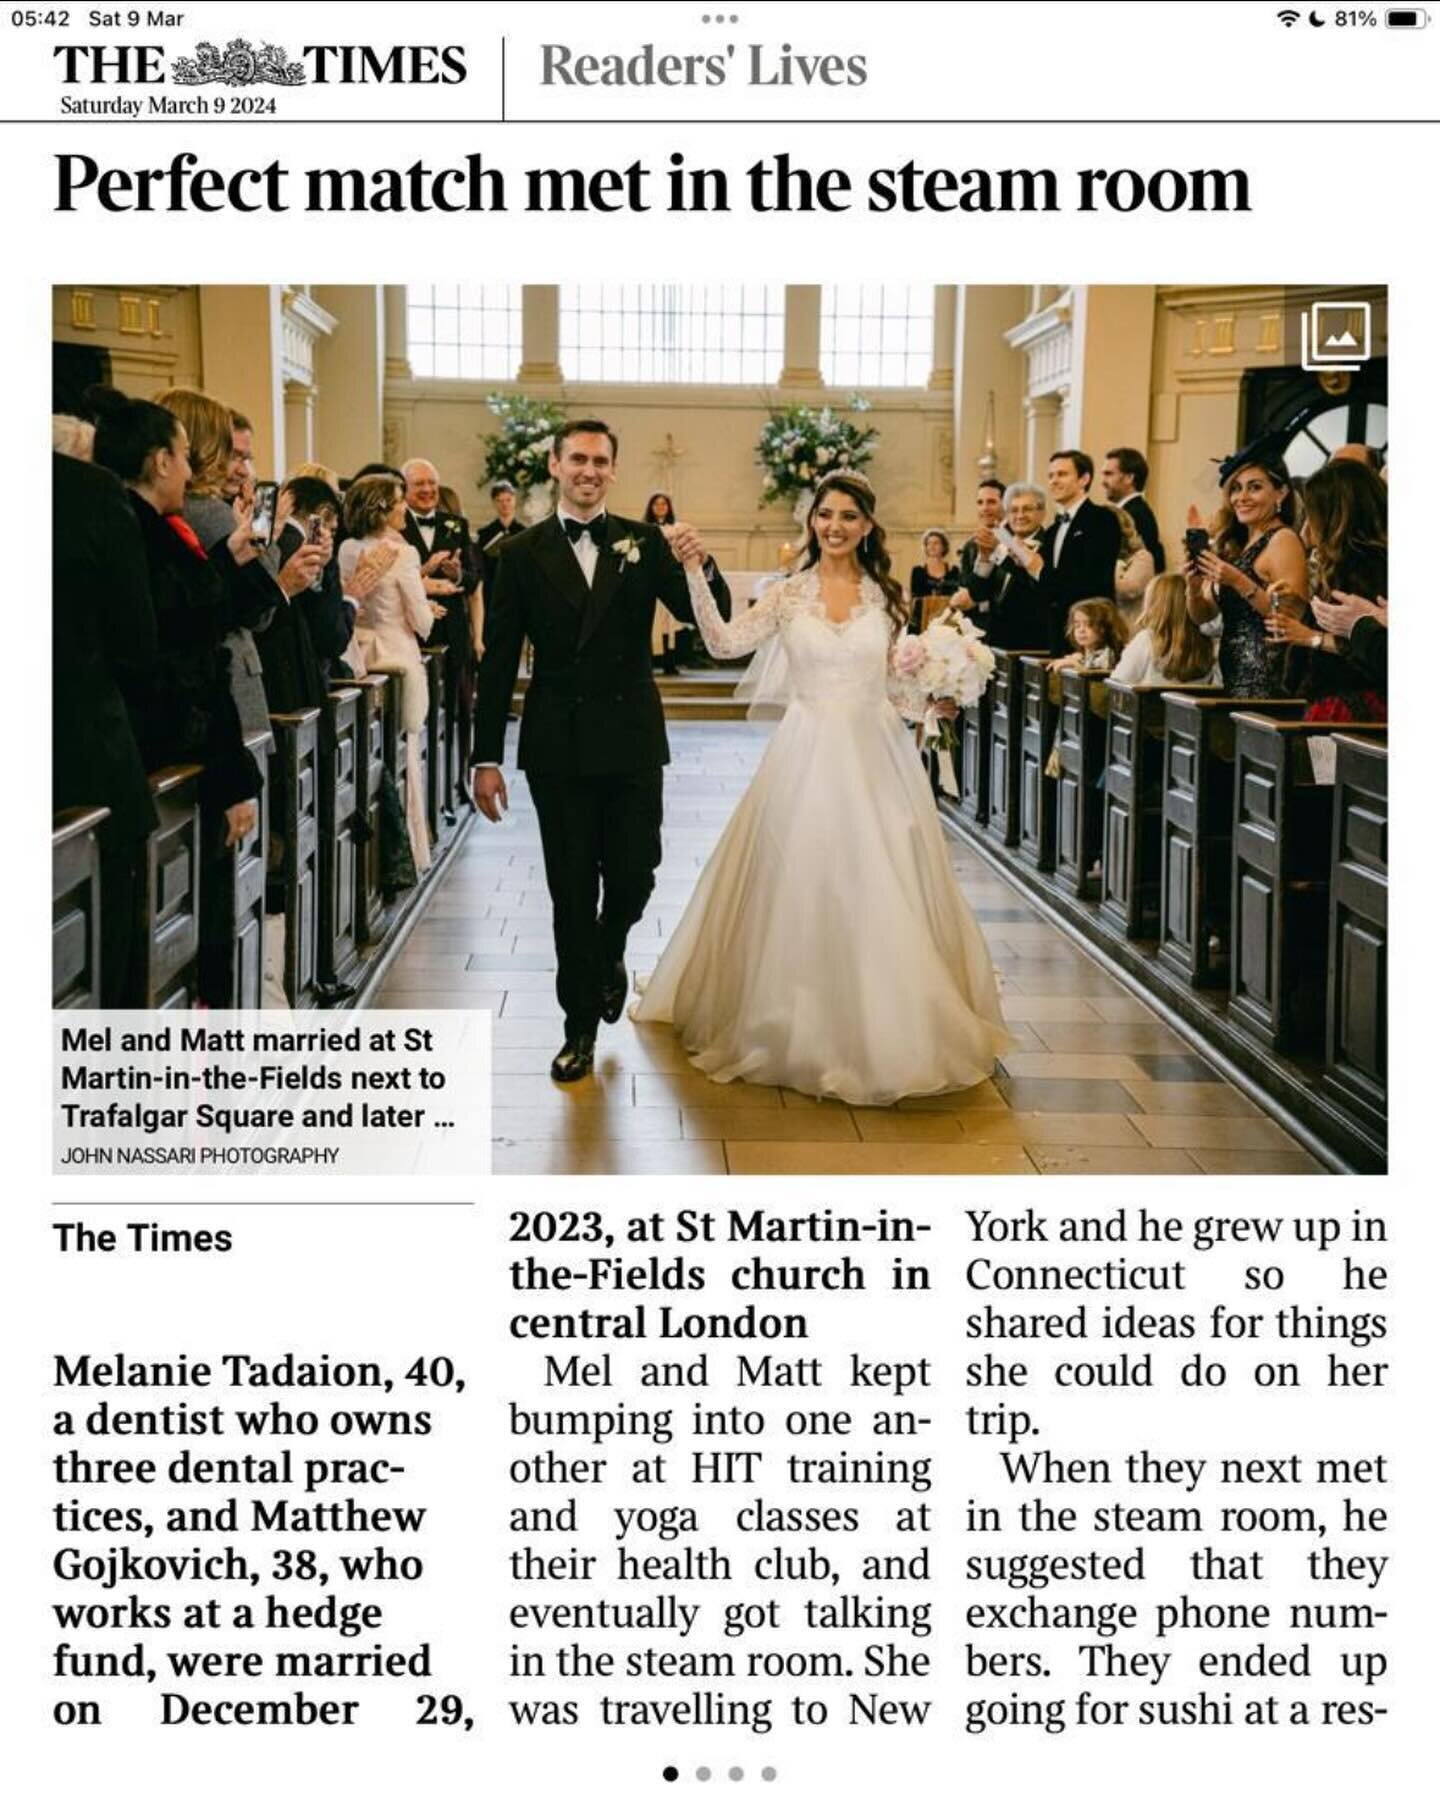 Really thrilled for Matt and Mel whose wedding on 29th December was featured in The Times today. 

@claridgeshotel 
@emma.murrayjones 
@rickypaulflowers 
@events_patrimoine 
@theblossomcomp 
@sofrehaghd_dorsa 
@rosetoneeventfurniture 
@powerhouse_hir